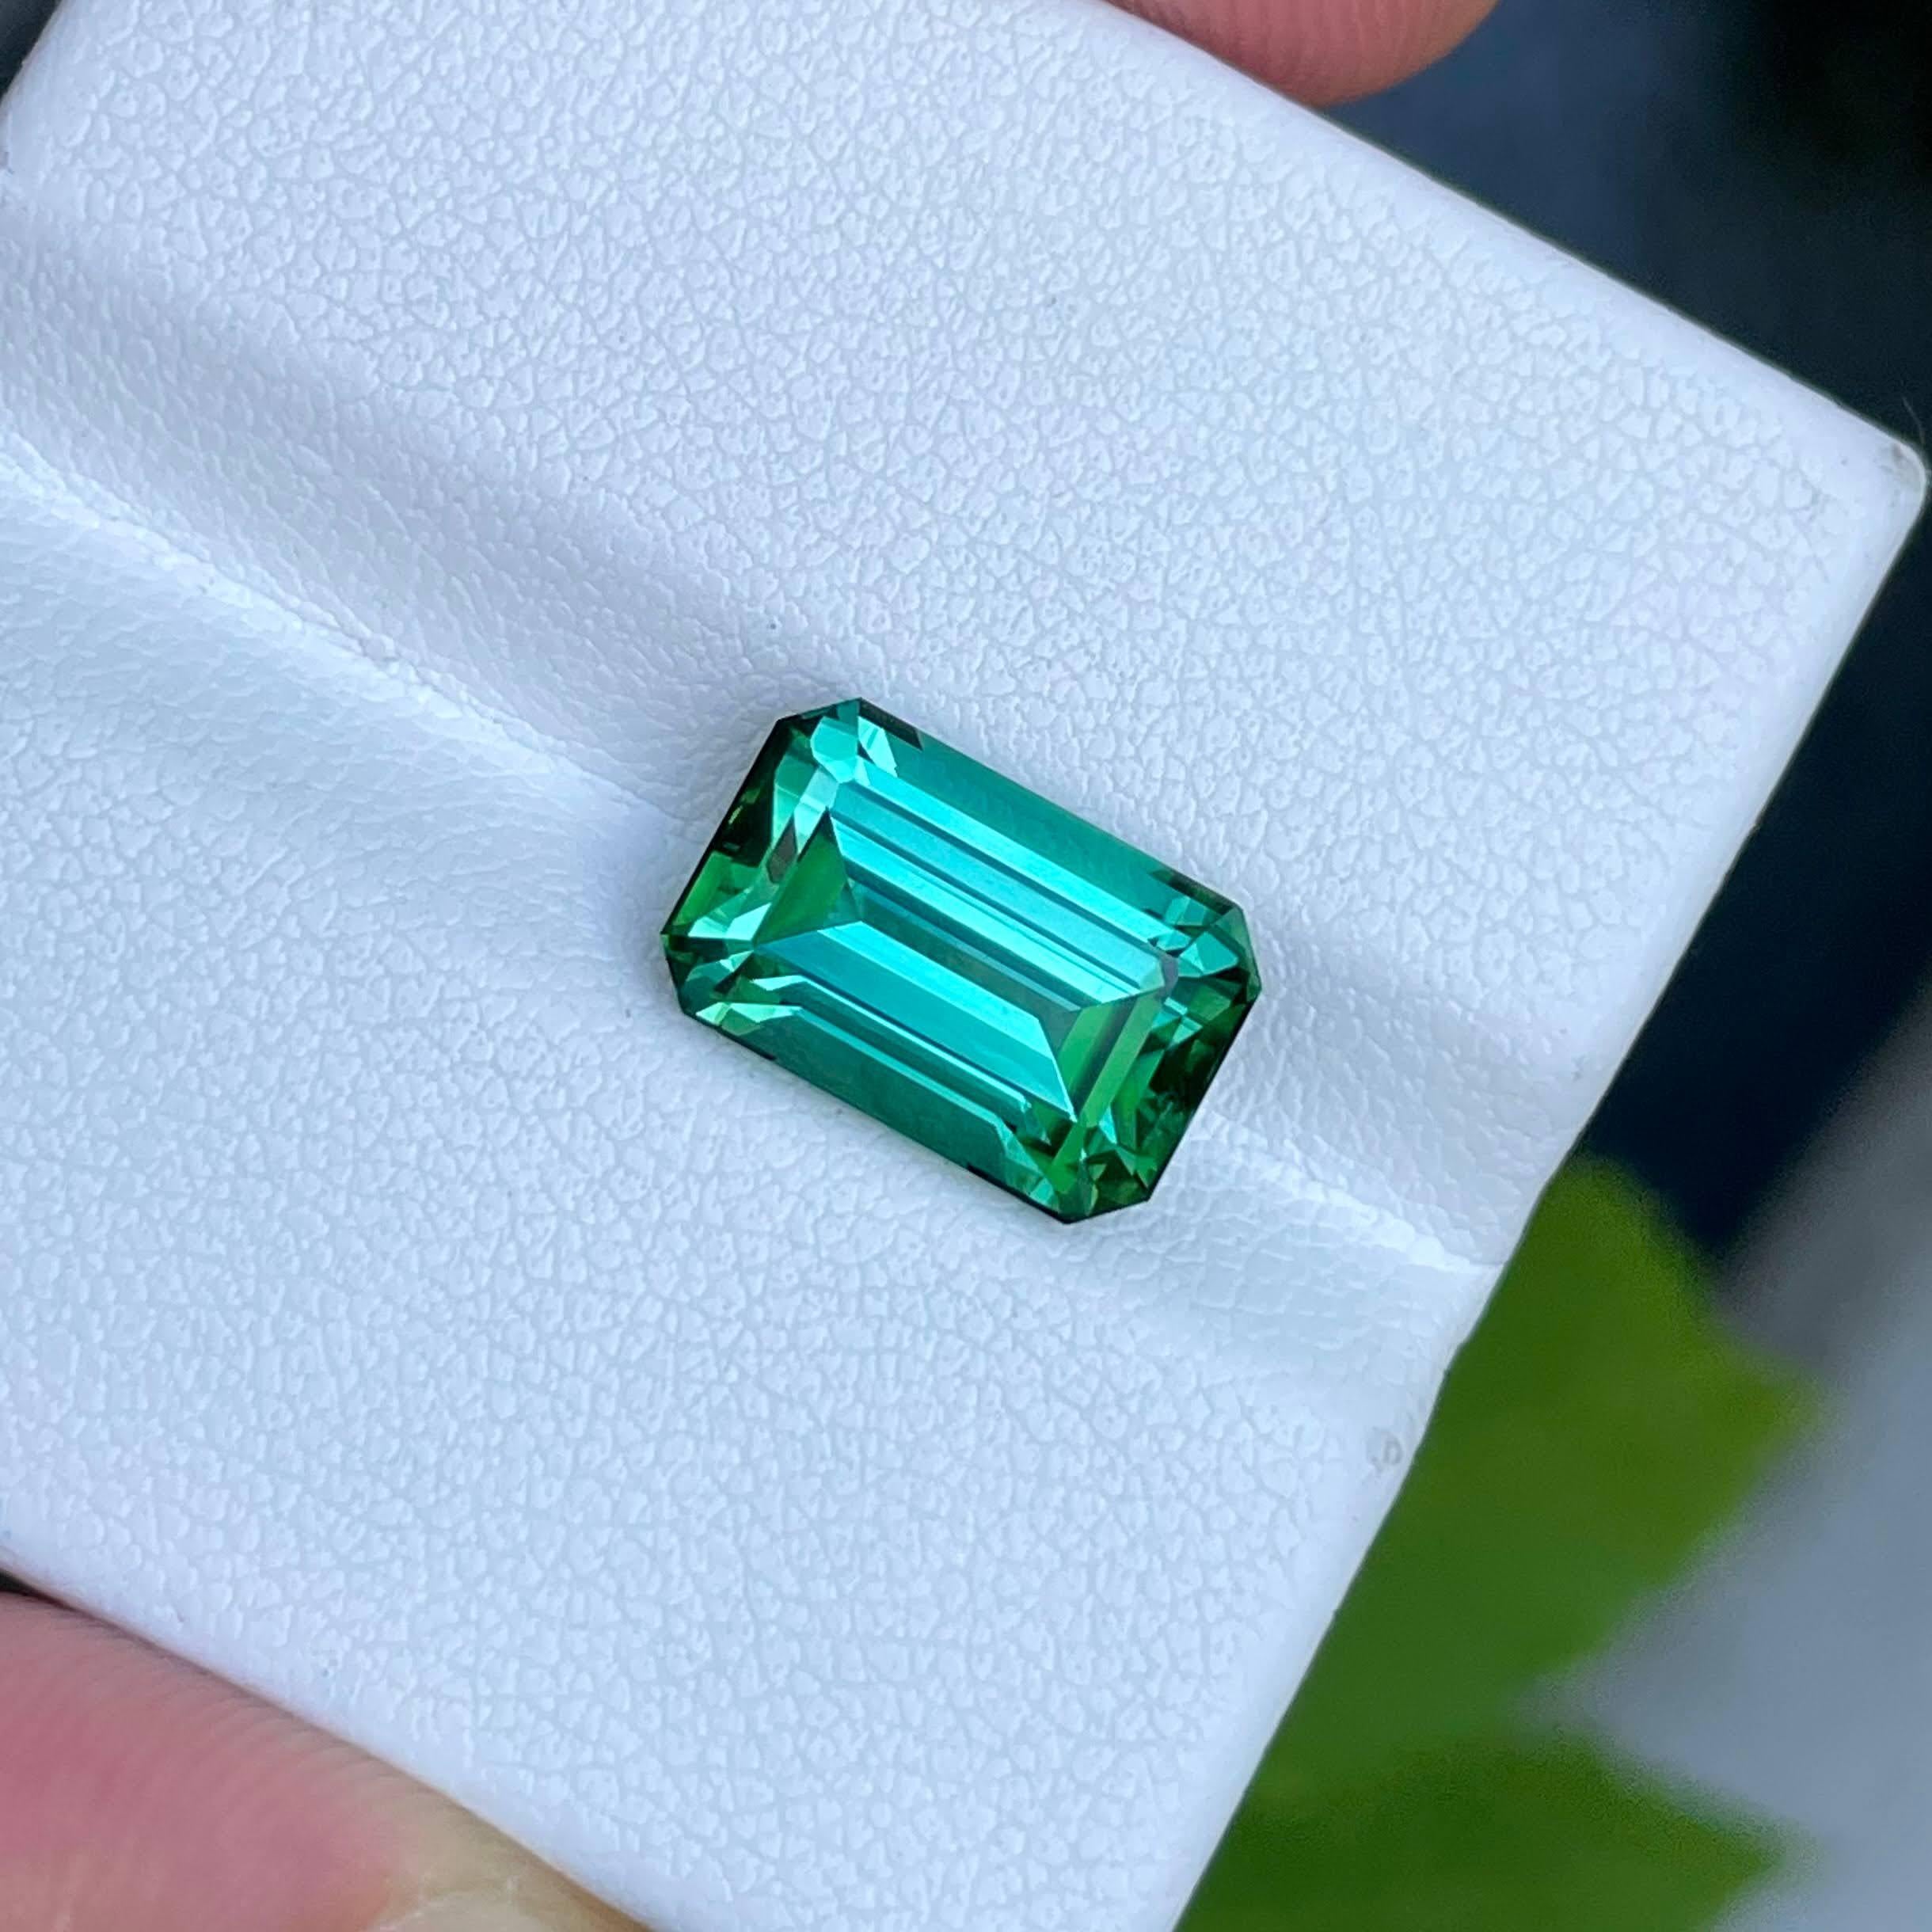 Weight 4.27 carats
Dimensions 12.4x7.37x5.6 mm
Treatment none 
Origin Afghanistan 
Clarity eye clean 
Shape octagon 
Cut emerald 




The exquisite beauty of a 4.27 carats Greenish Blue Tourmaline Stone takes center stage in this remarkable gem.